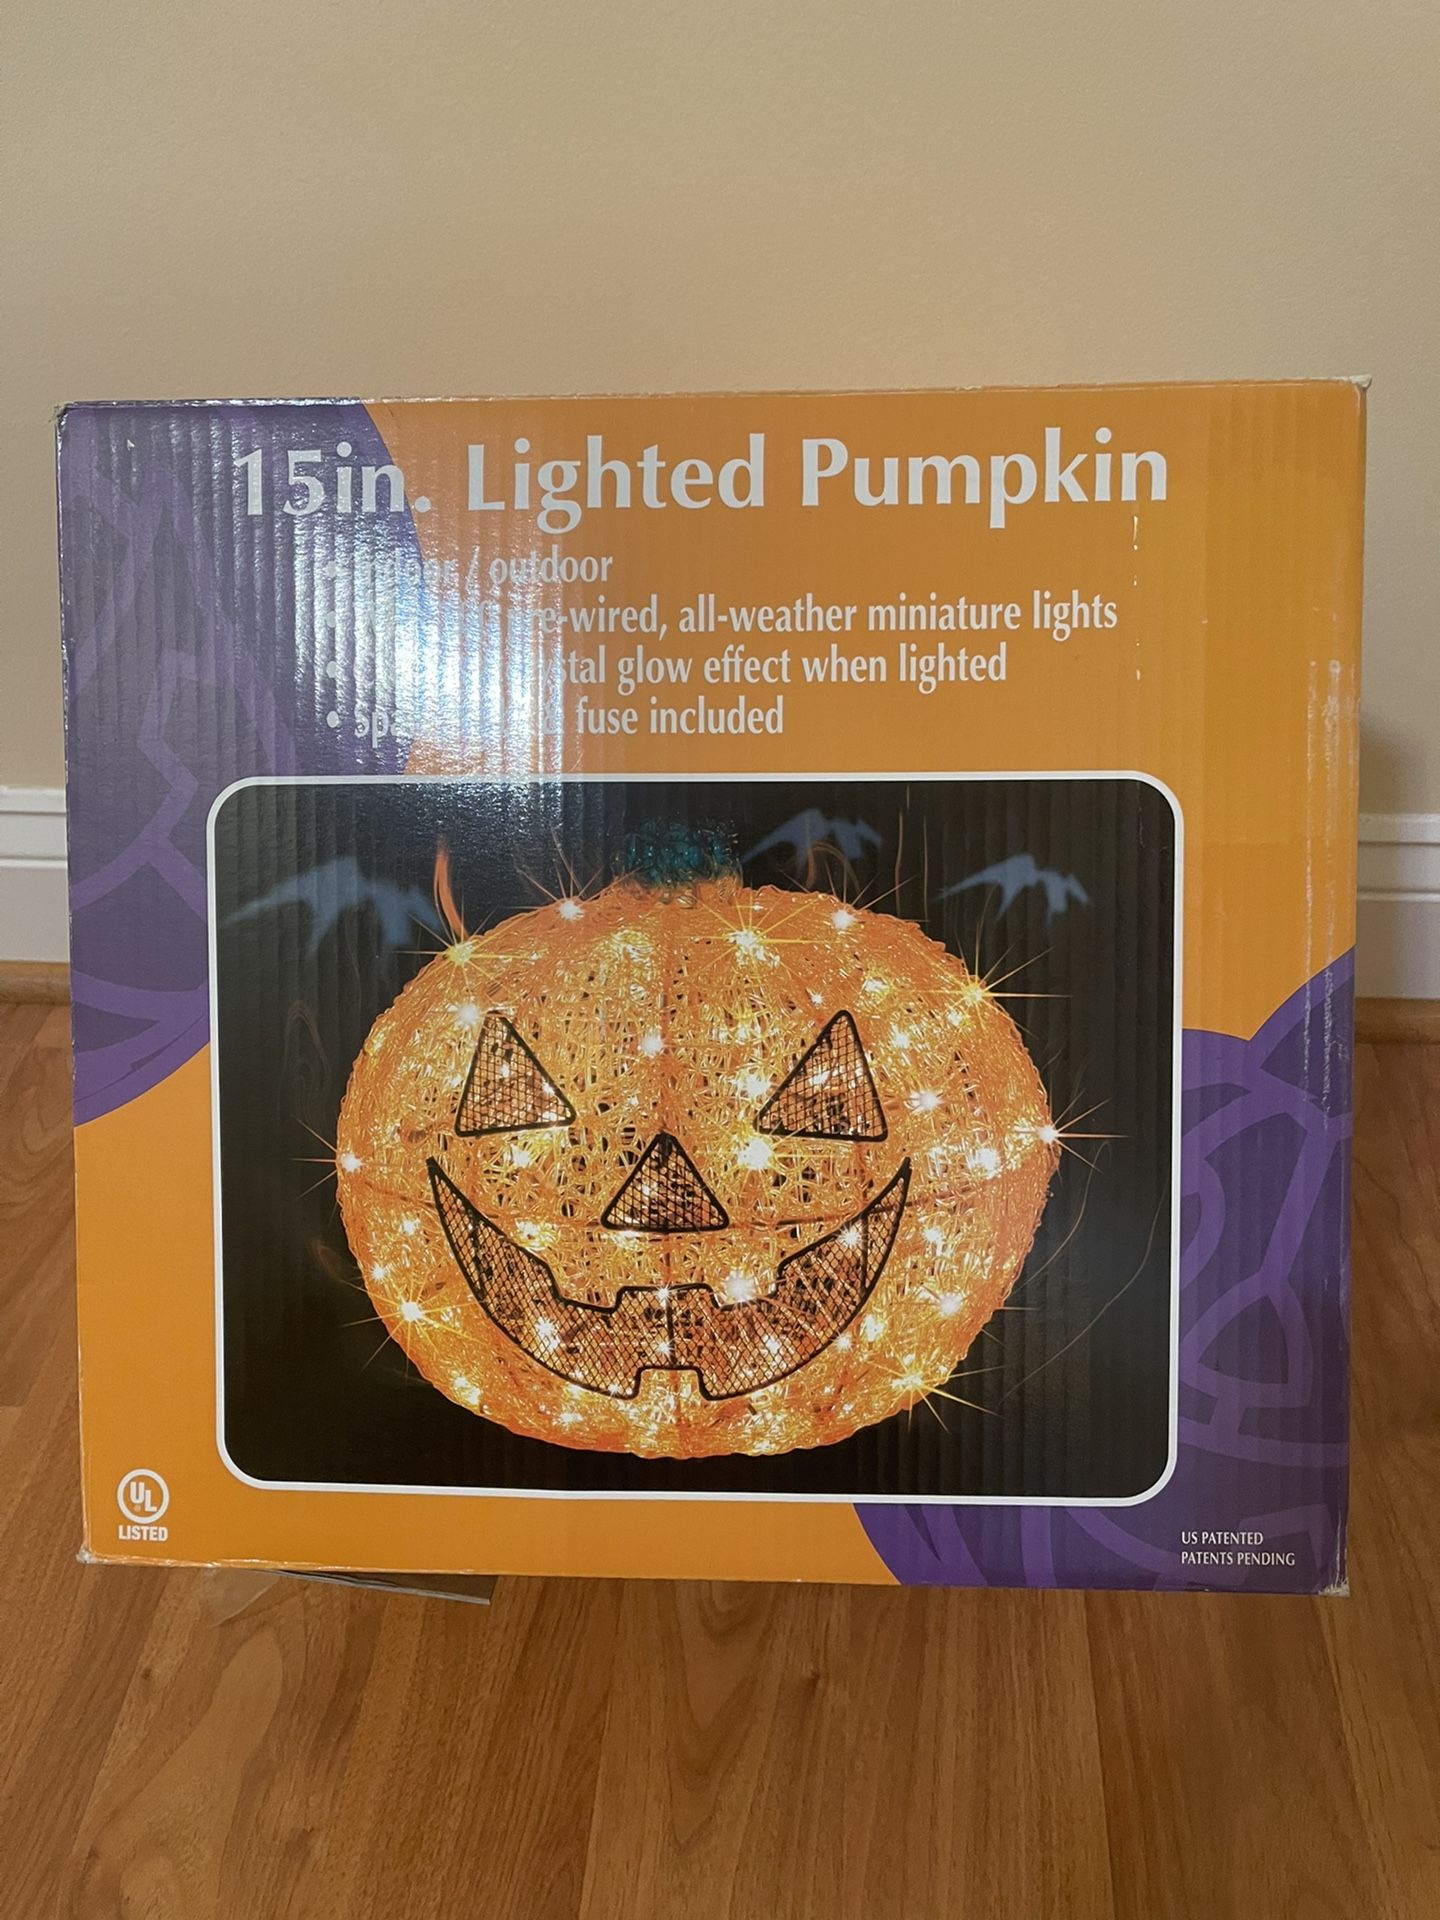 Halloween pumpkins - $25.00 Price For Two - 15-inch LIGHTED PUMPKINS Very Cute